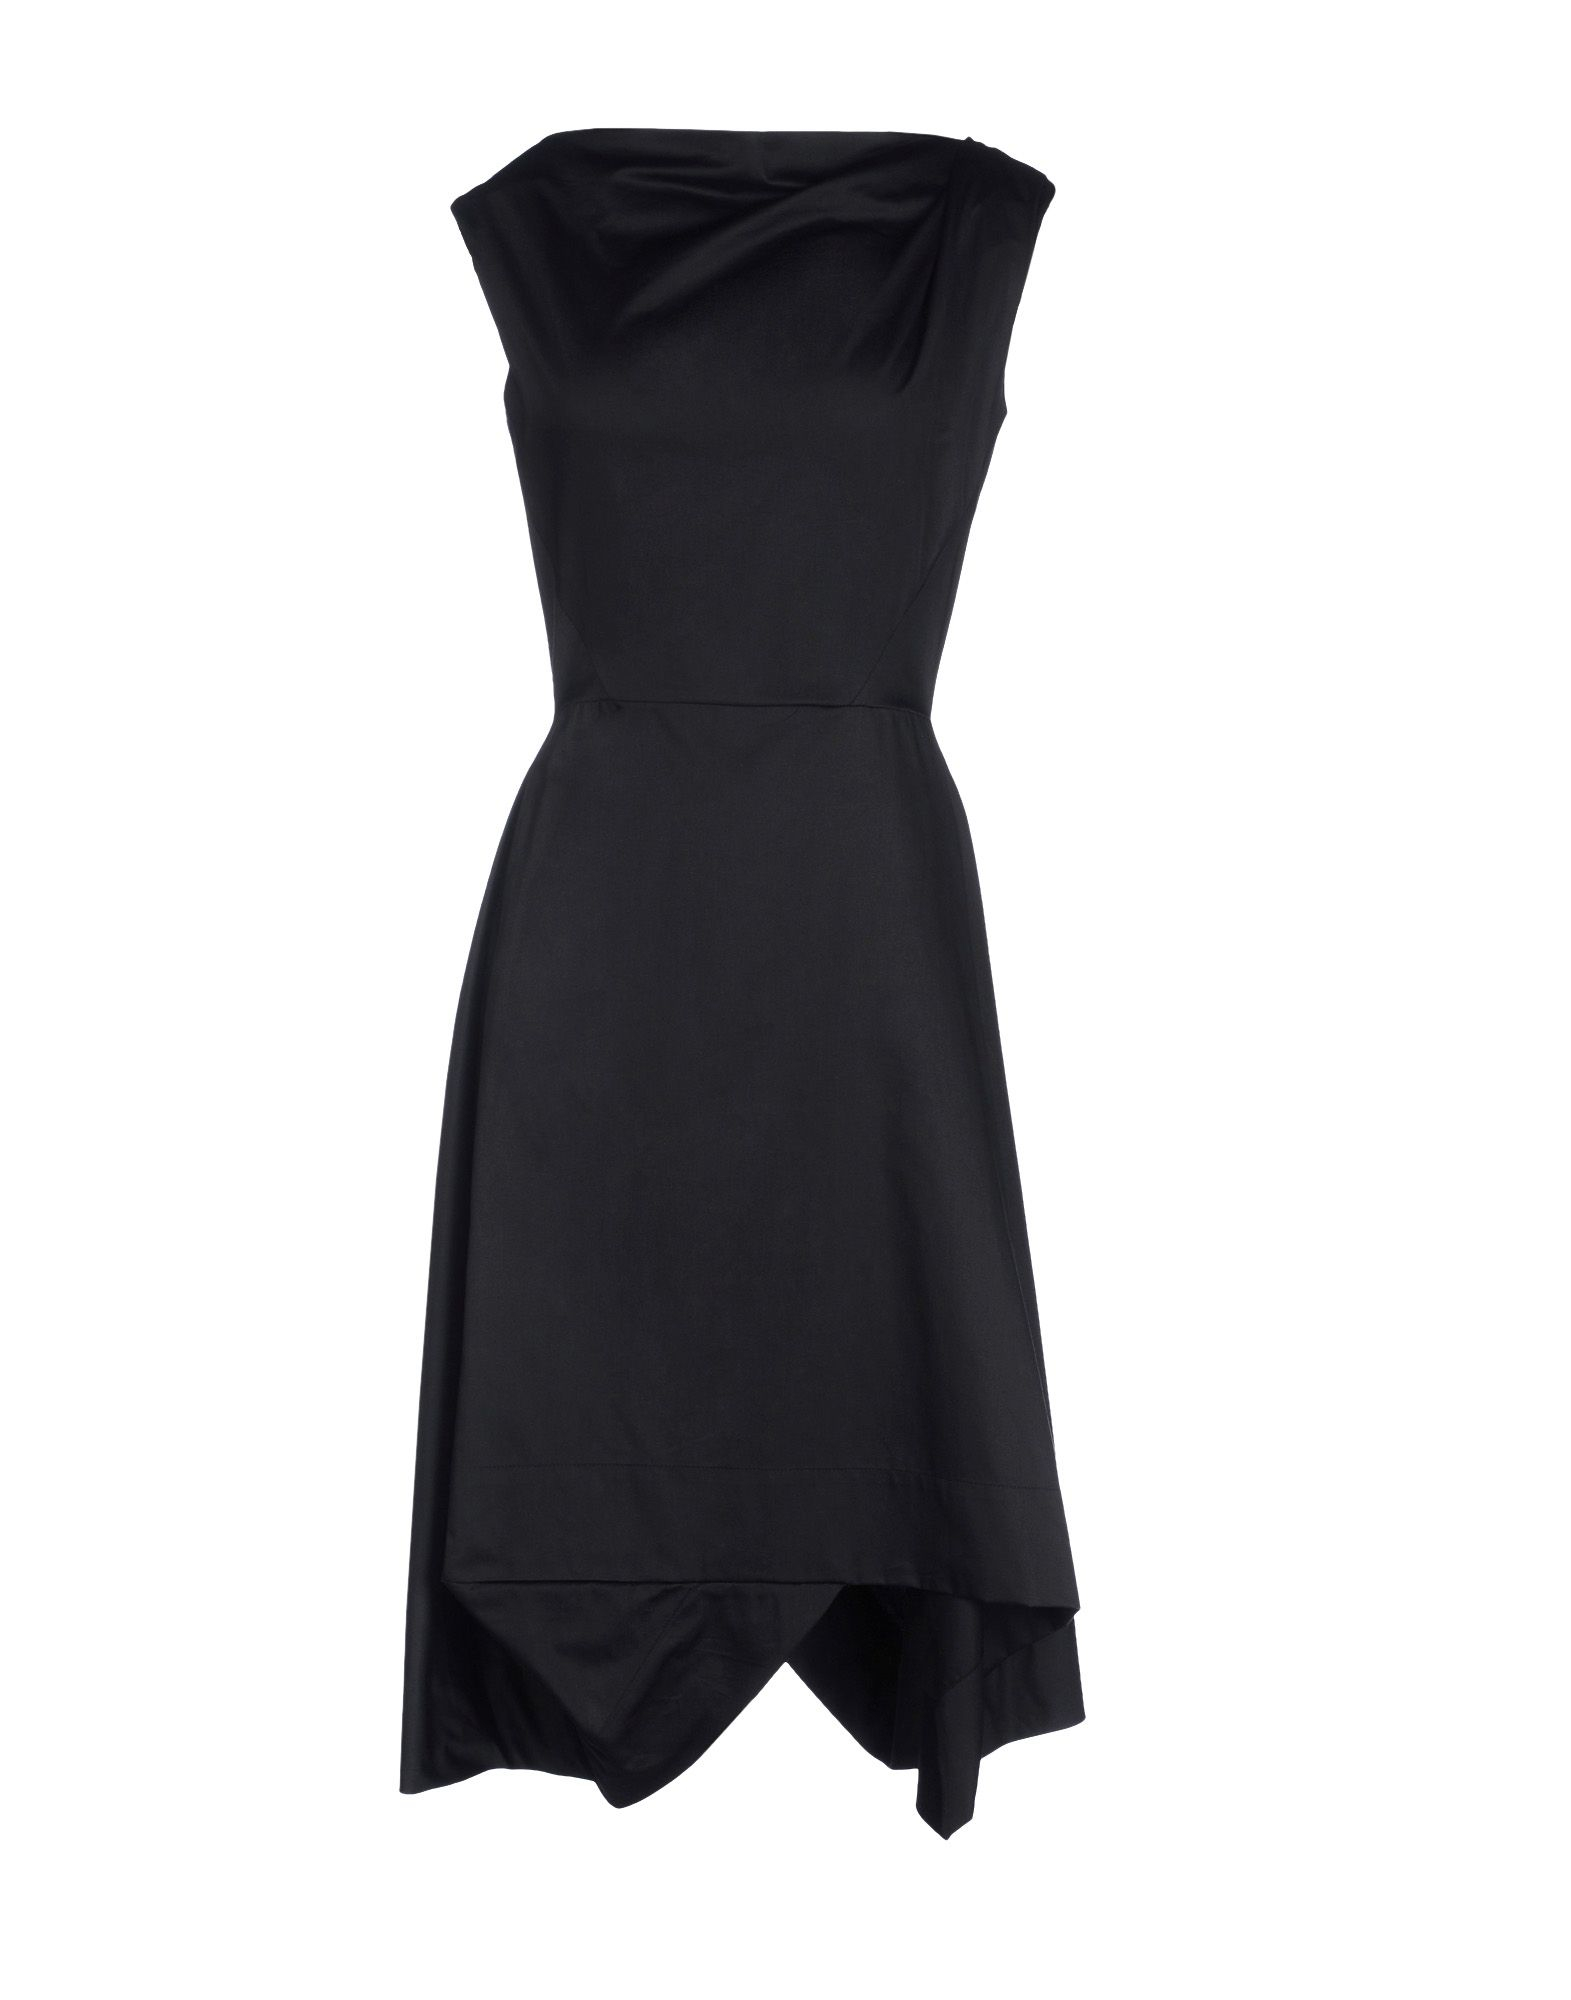 Vivienne Westwood Anglomania 3/4 Length Dress in Black | Lyst